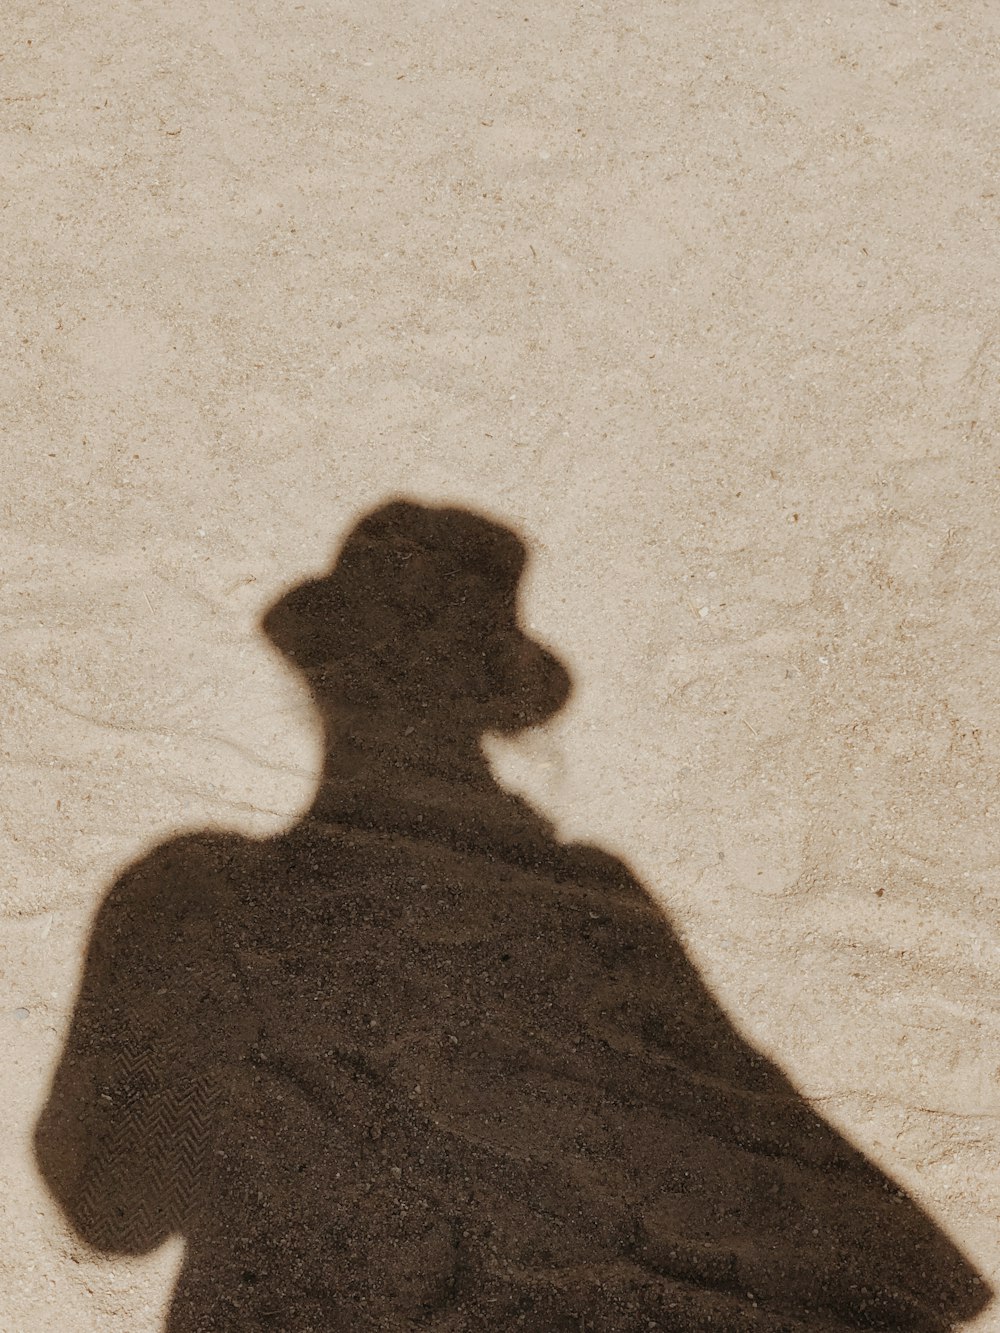 shadow of person on white sand